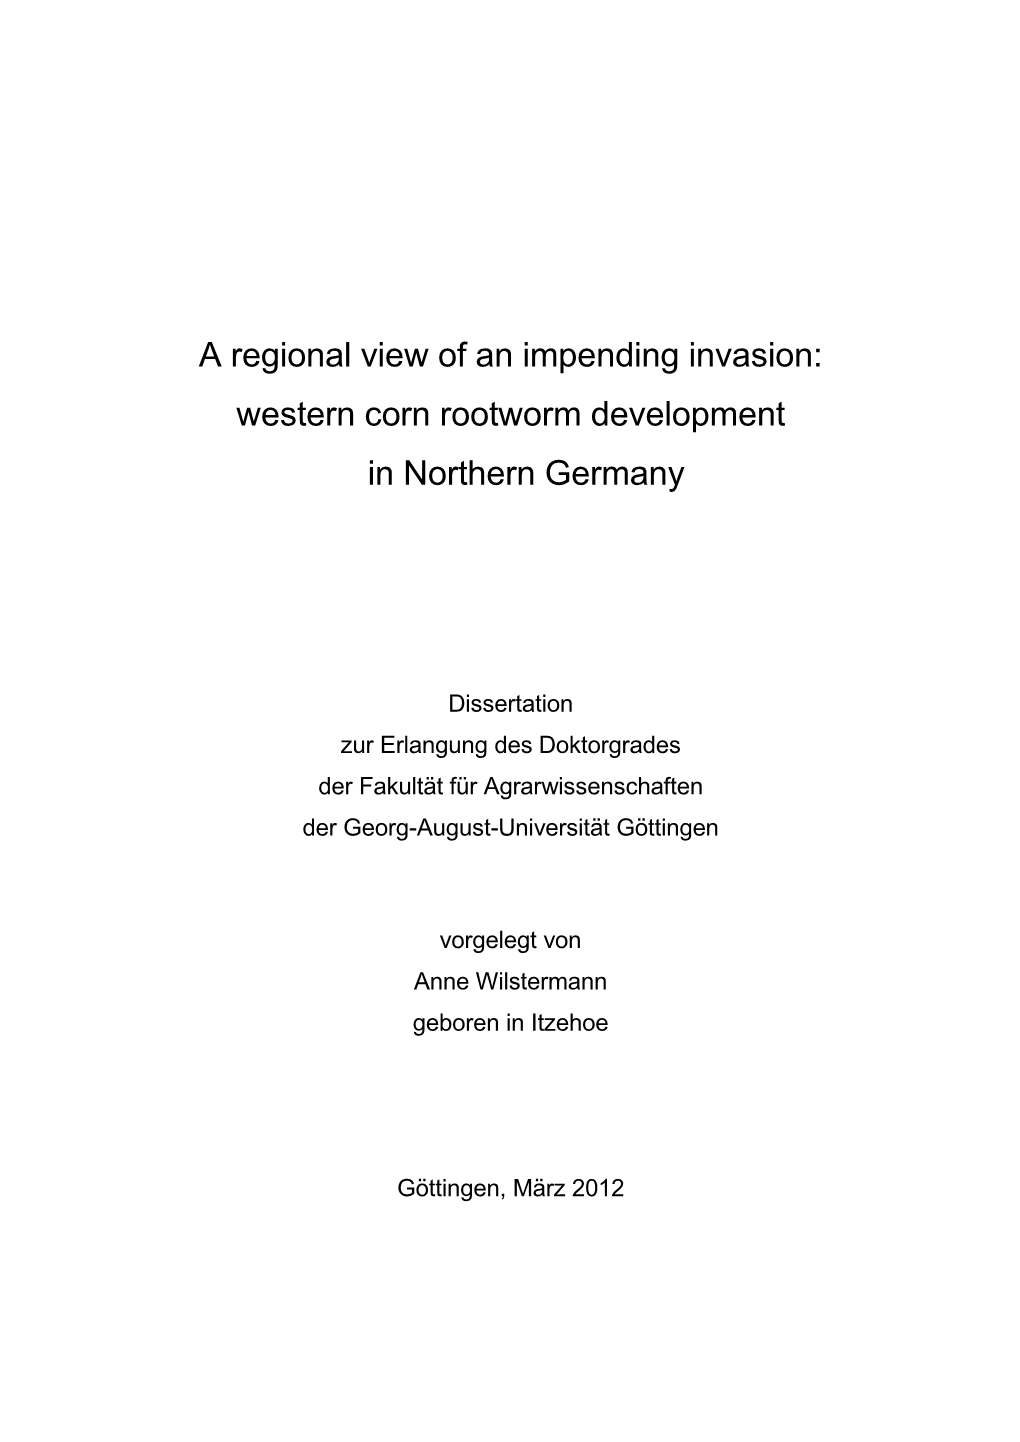 A Regional View of an Impending Invasion: Western Corn Rootworm Development in Northern Germany